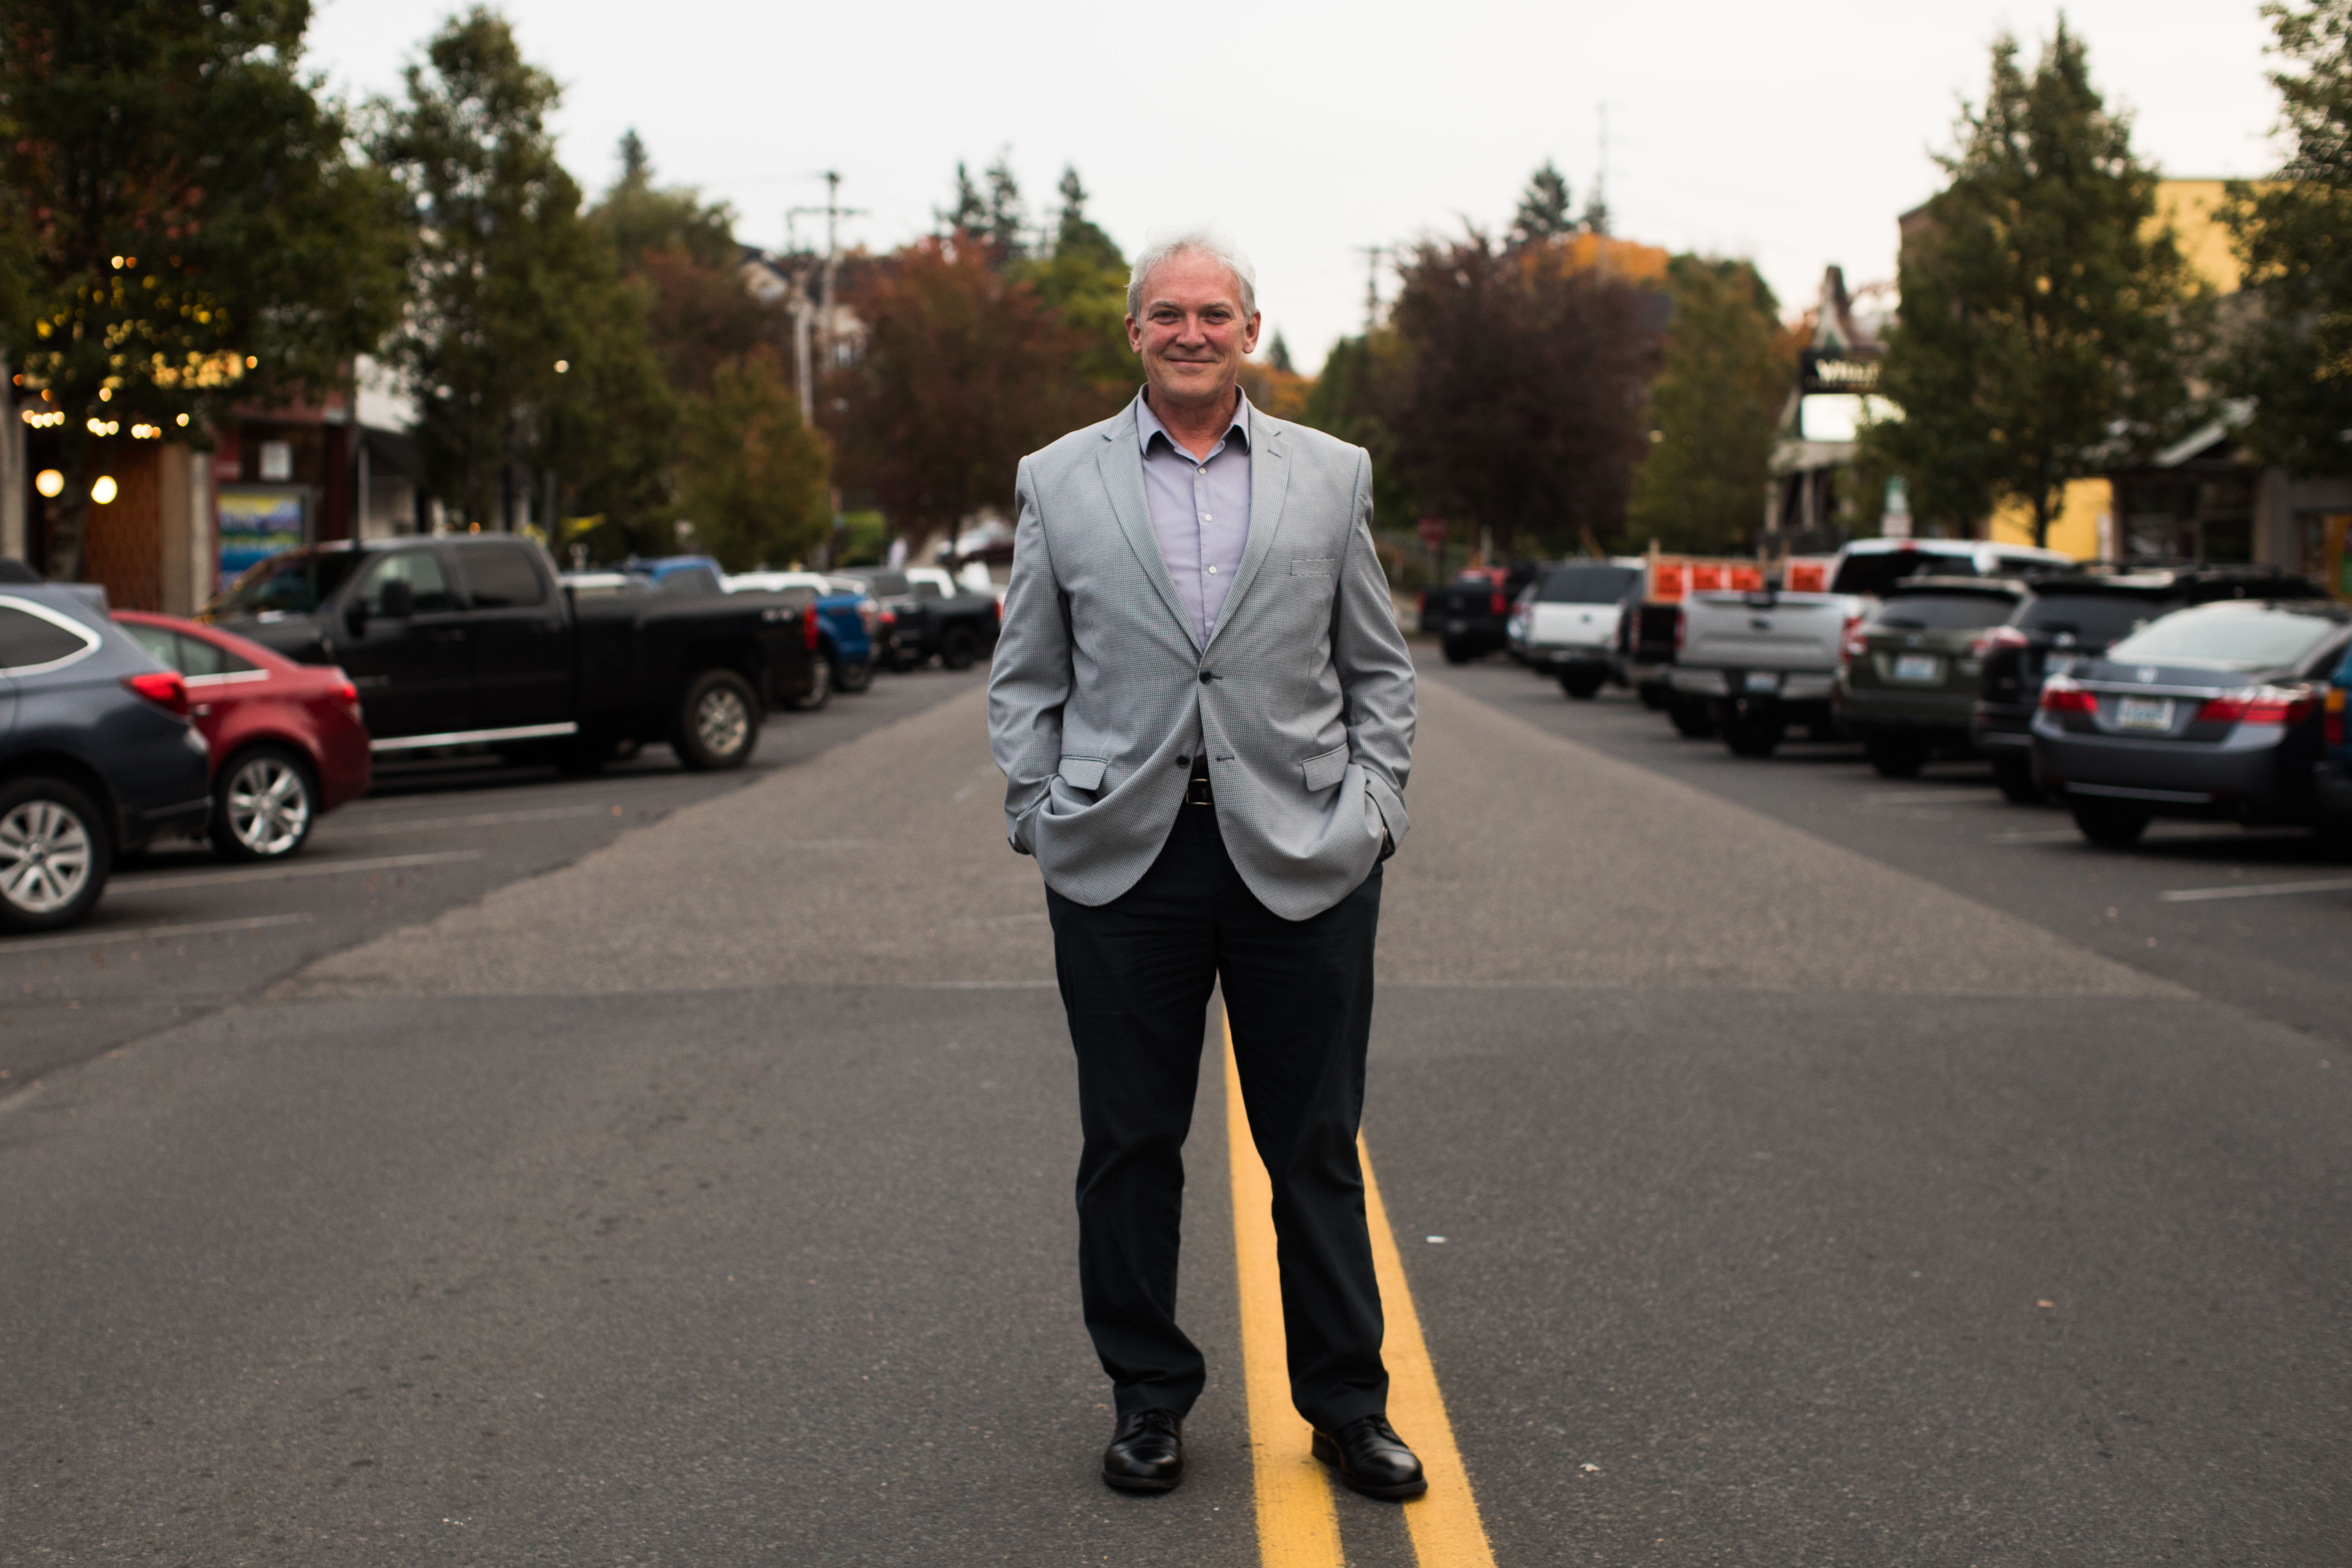 Kalama's Mayor Mike Reuter stands on the street for a photo.